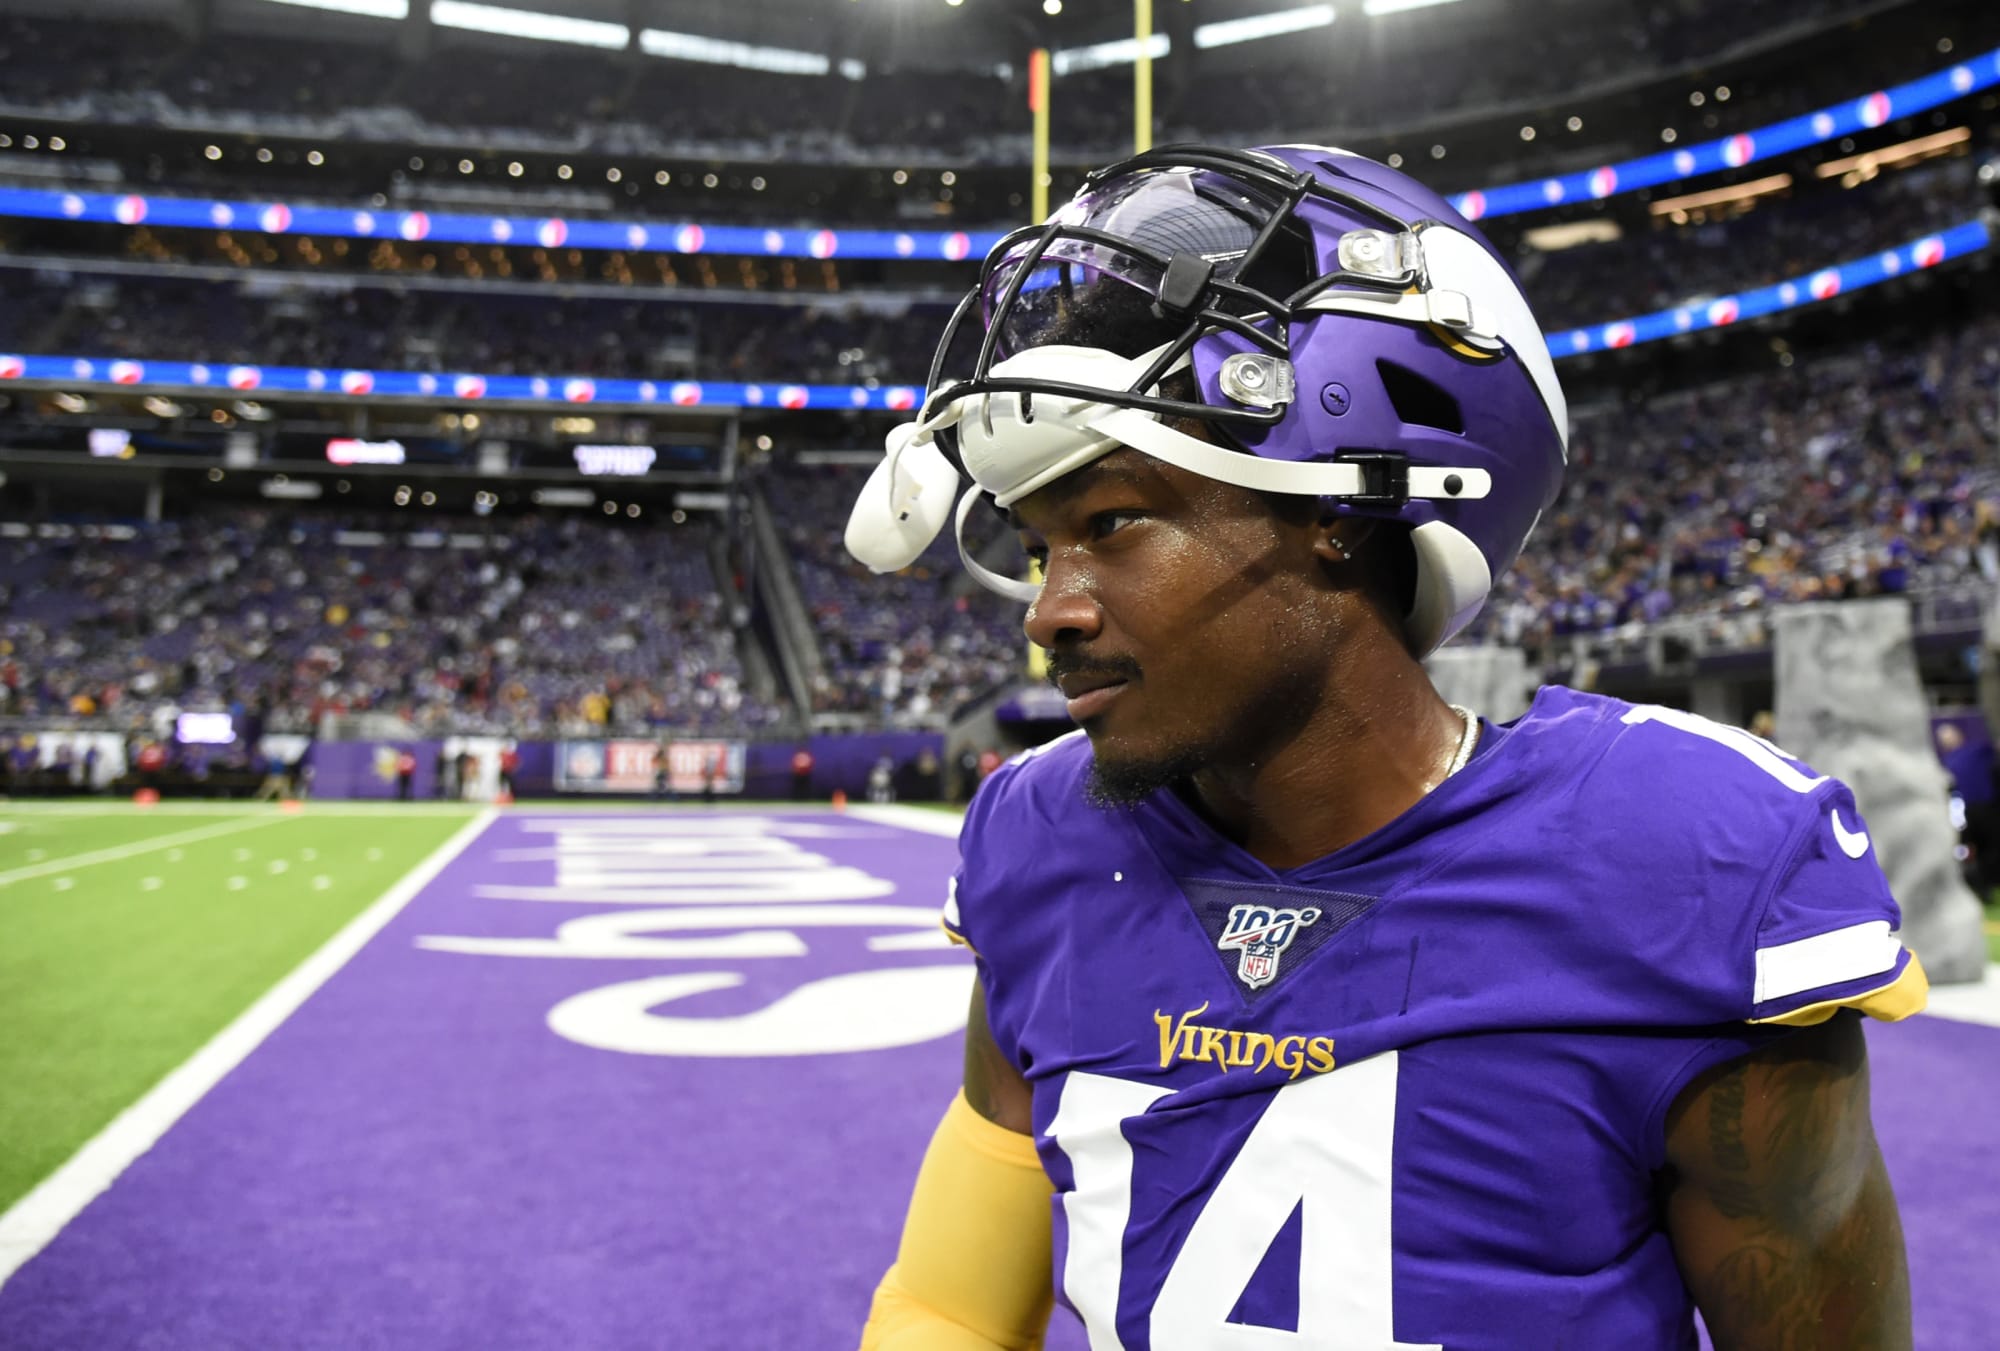 Should the Kansas City Chiefs trade for Vikings' wide receiver Stefon Diggs?